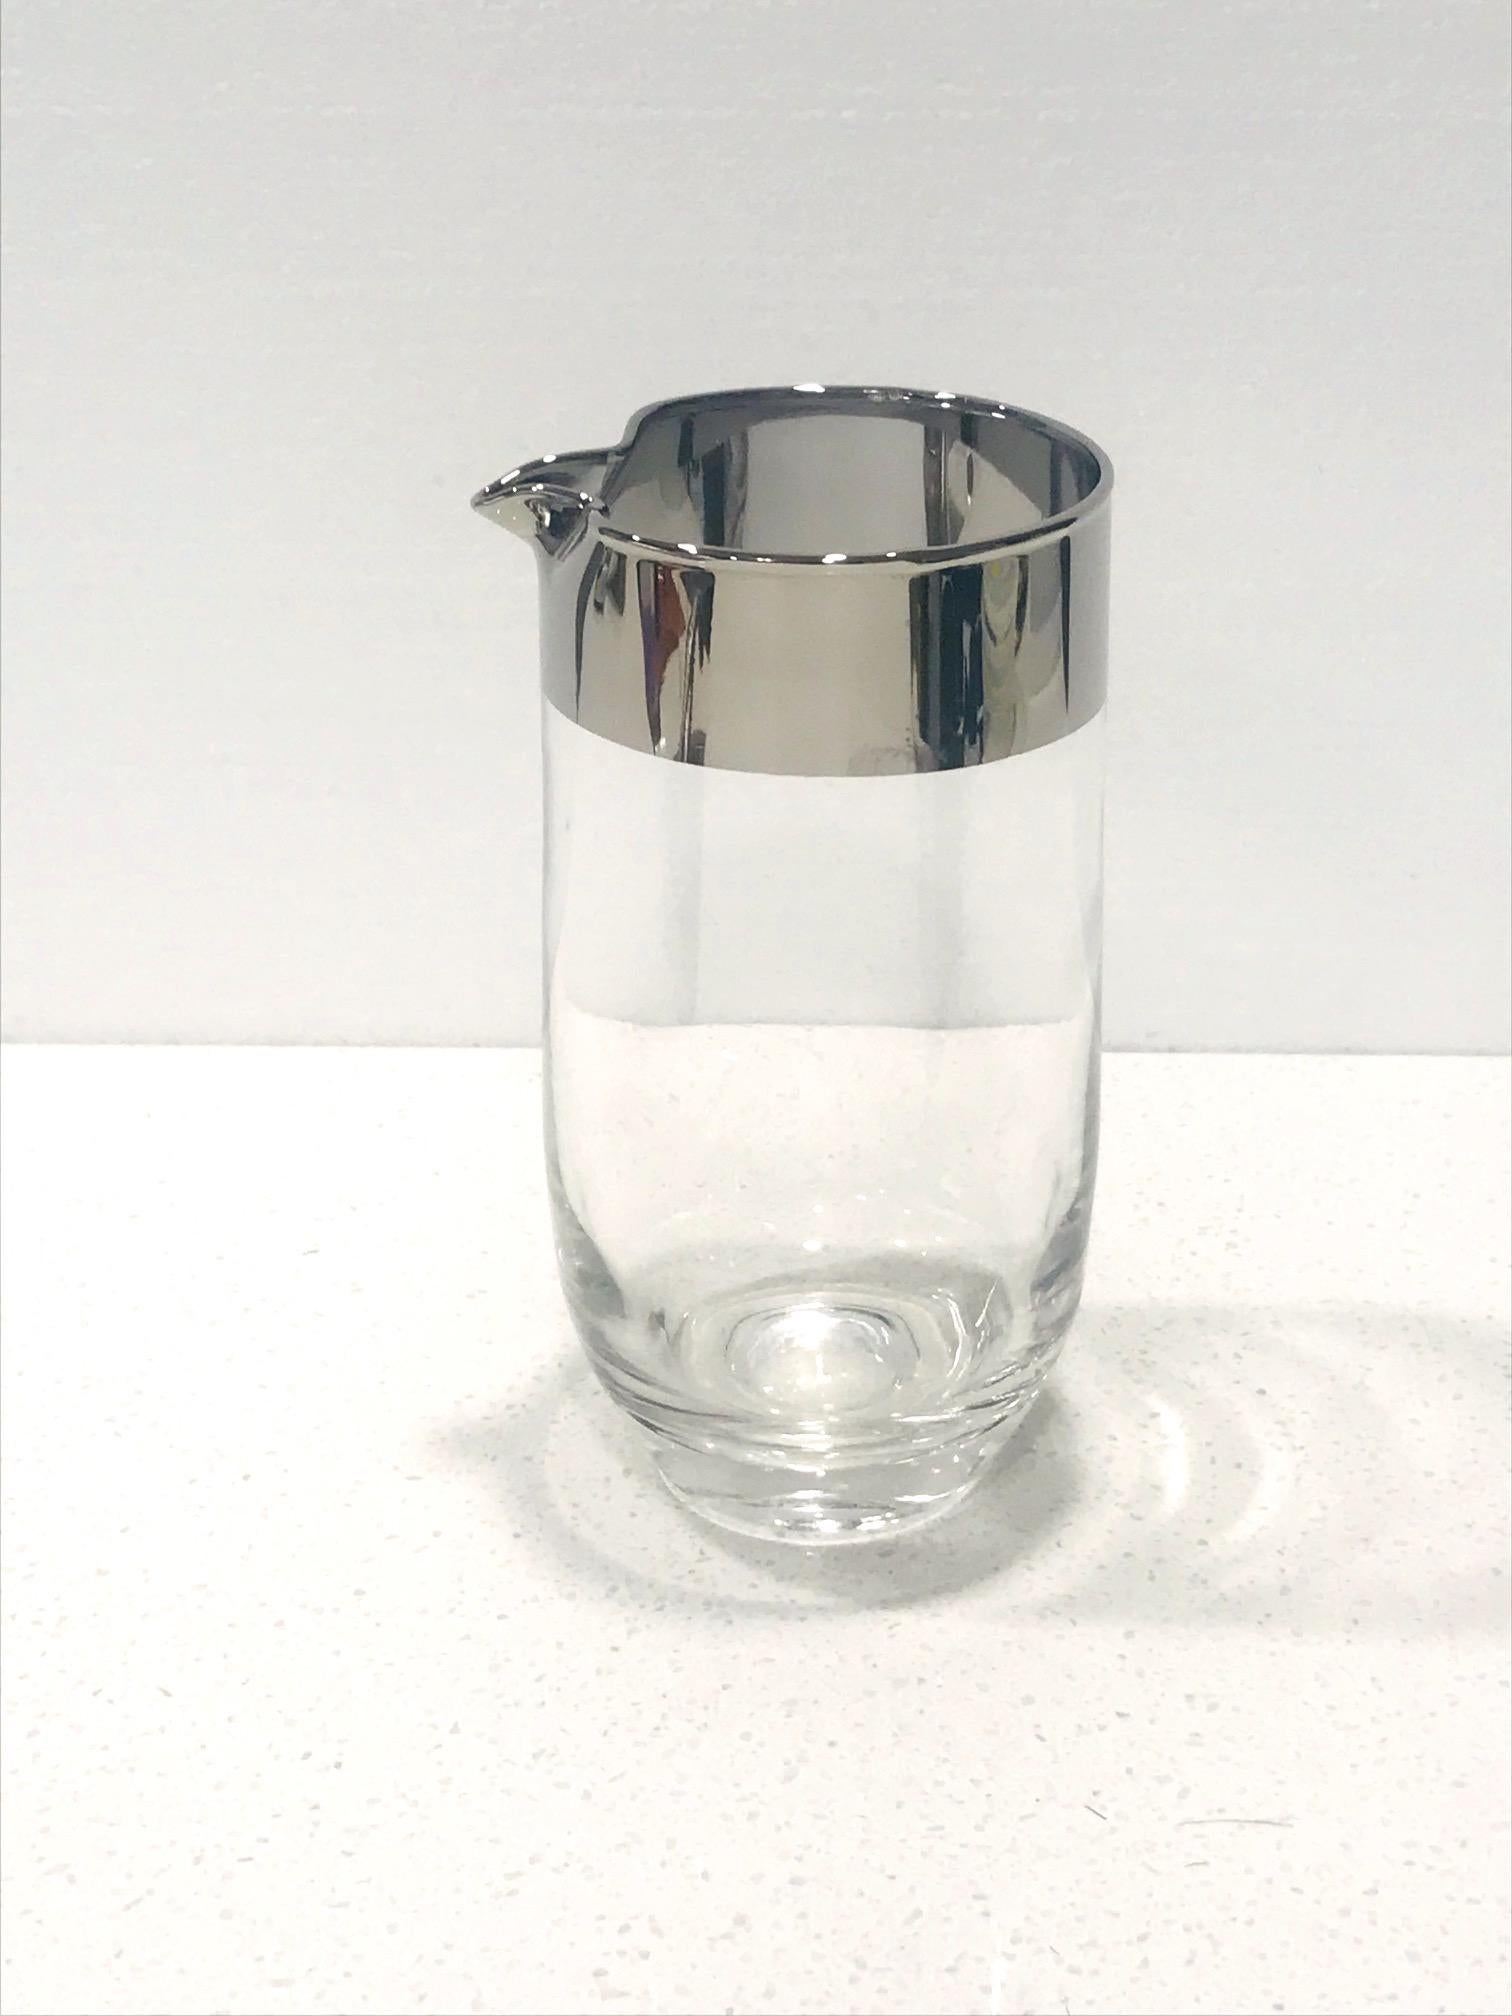 Mid-Century Modern Vintage Glass Cocktail Mixer with Silver Overlay by Dorothy Thorpe, c. 1960's